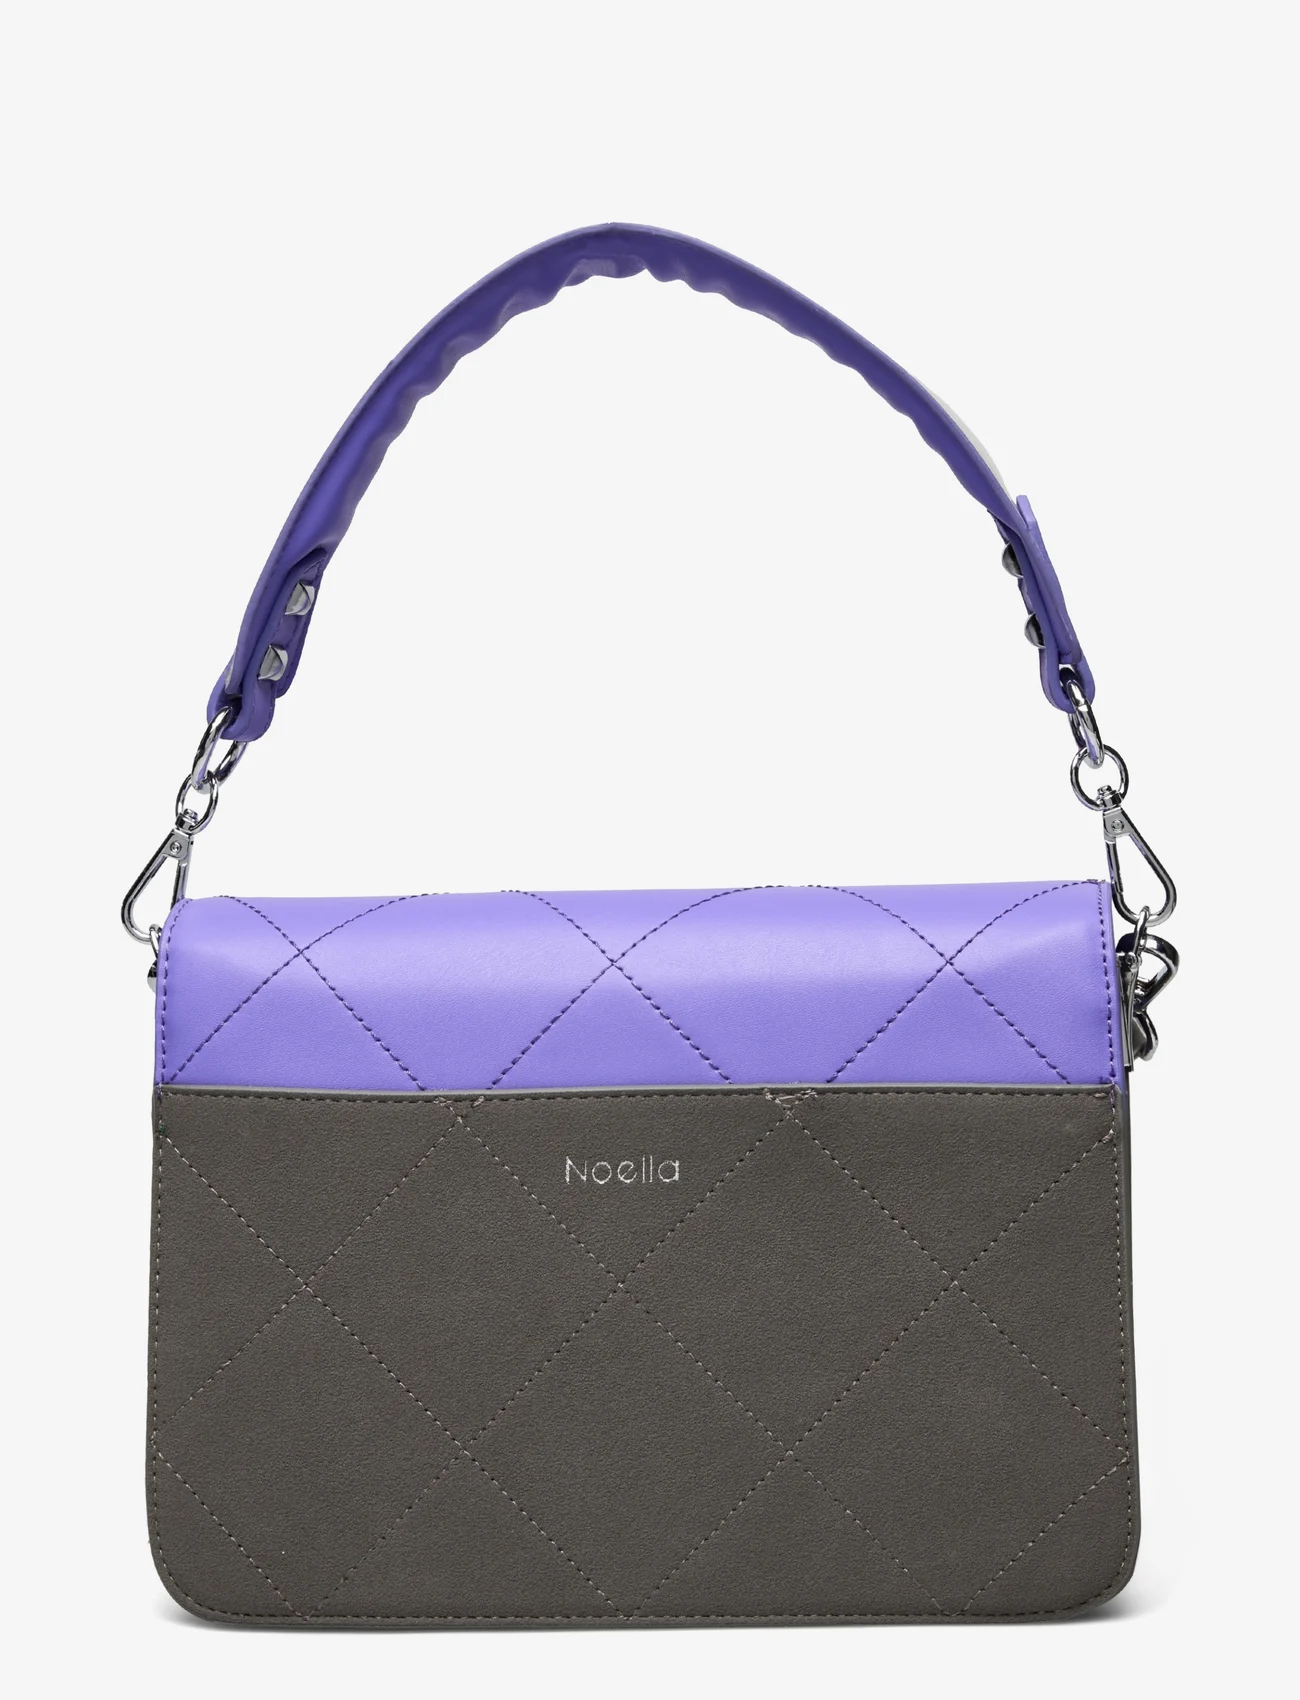 Noella - Blanca Multi Compartment Bag - party wear at outlet prices - bright purple/grey lak/grey - 1